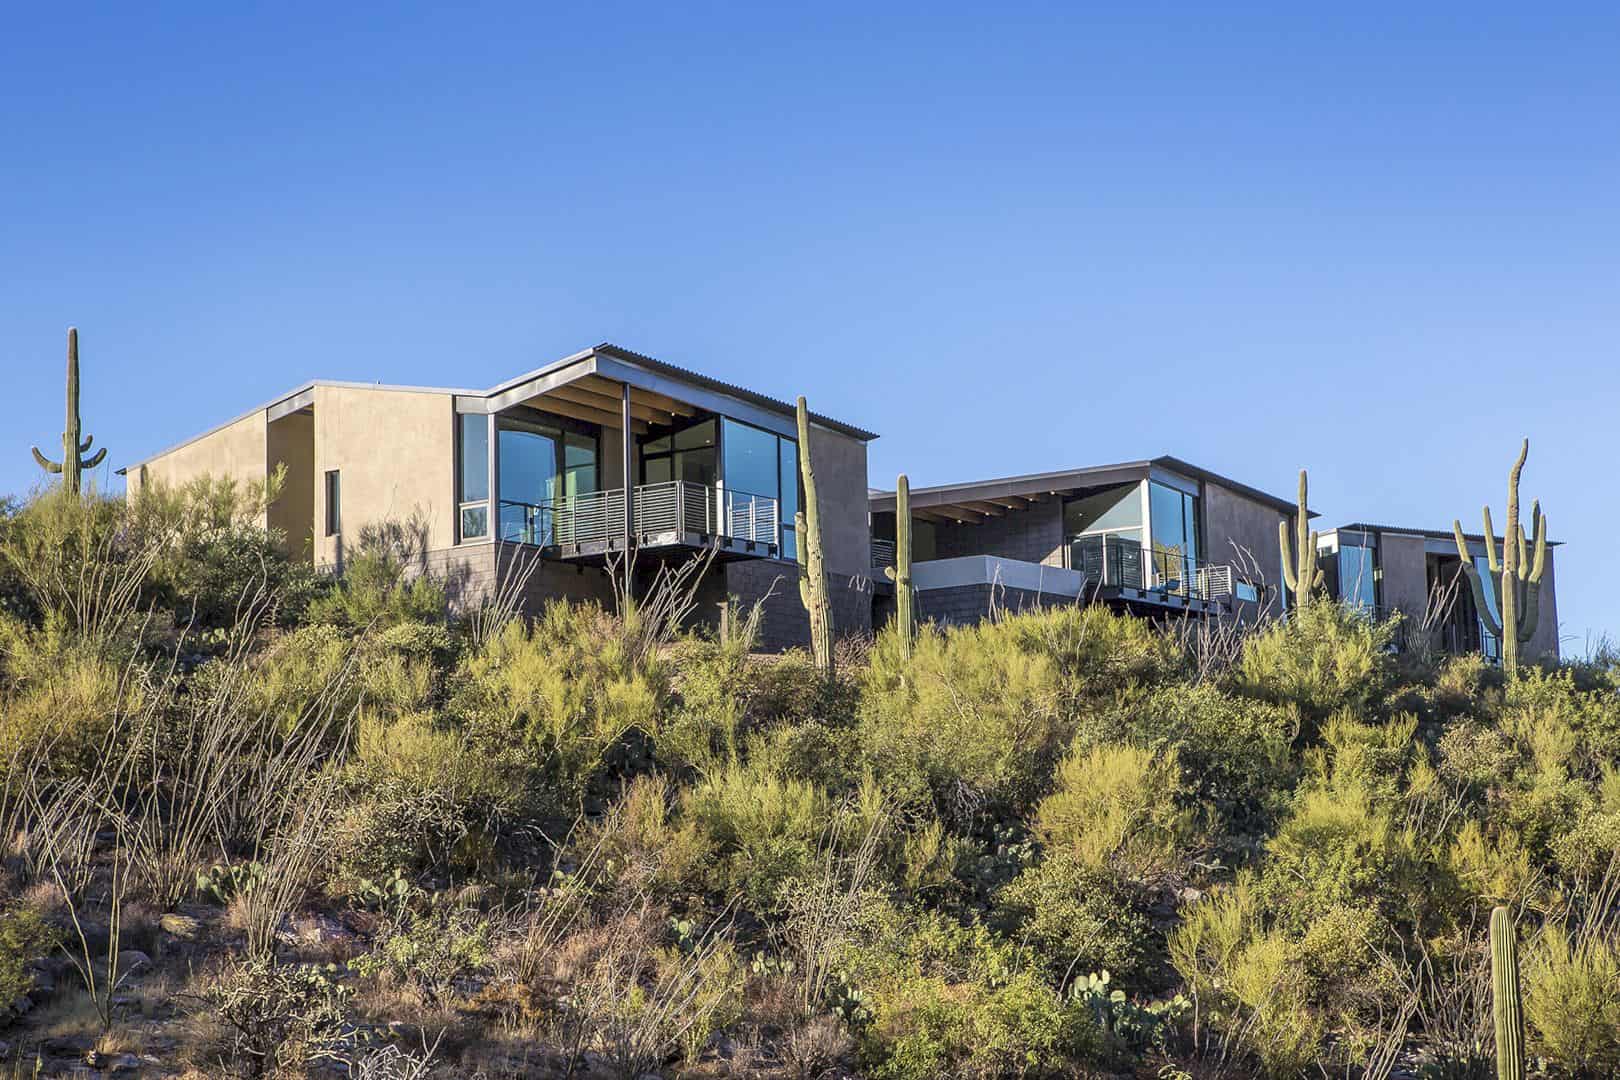 Casa De Plegado A Sustainable Residence Embracing The Catalina Foothill Surroundings 19